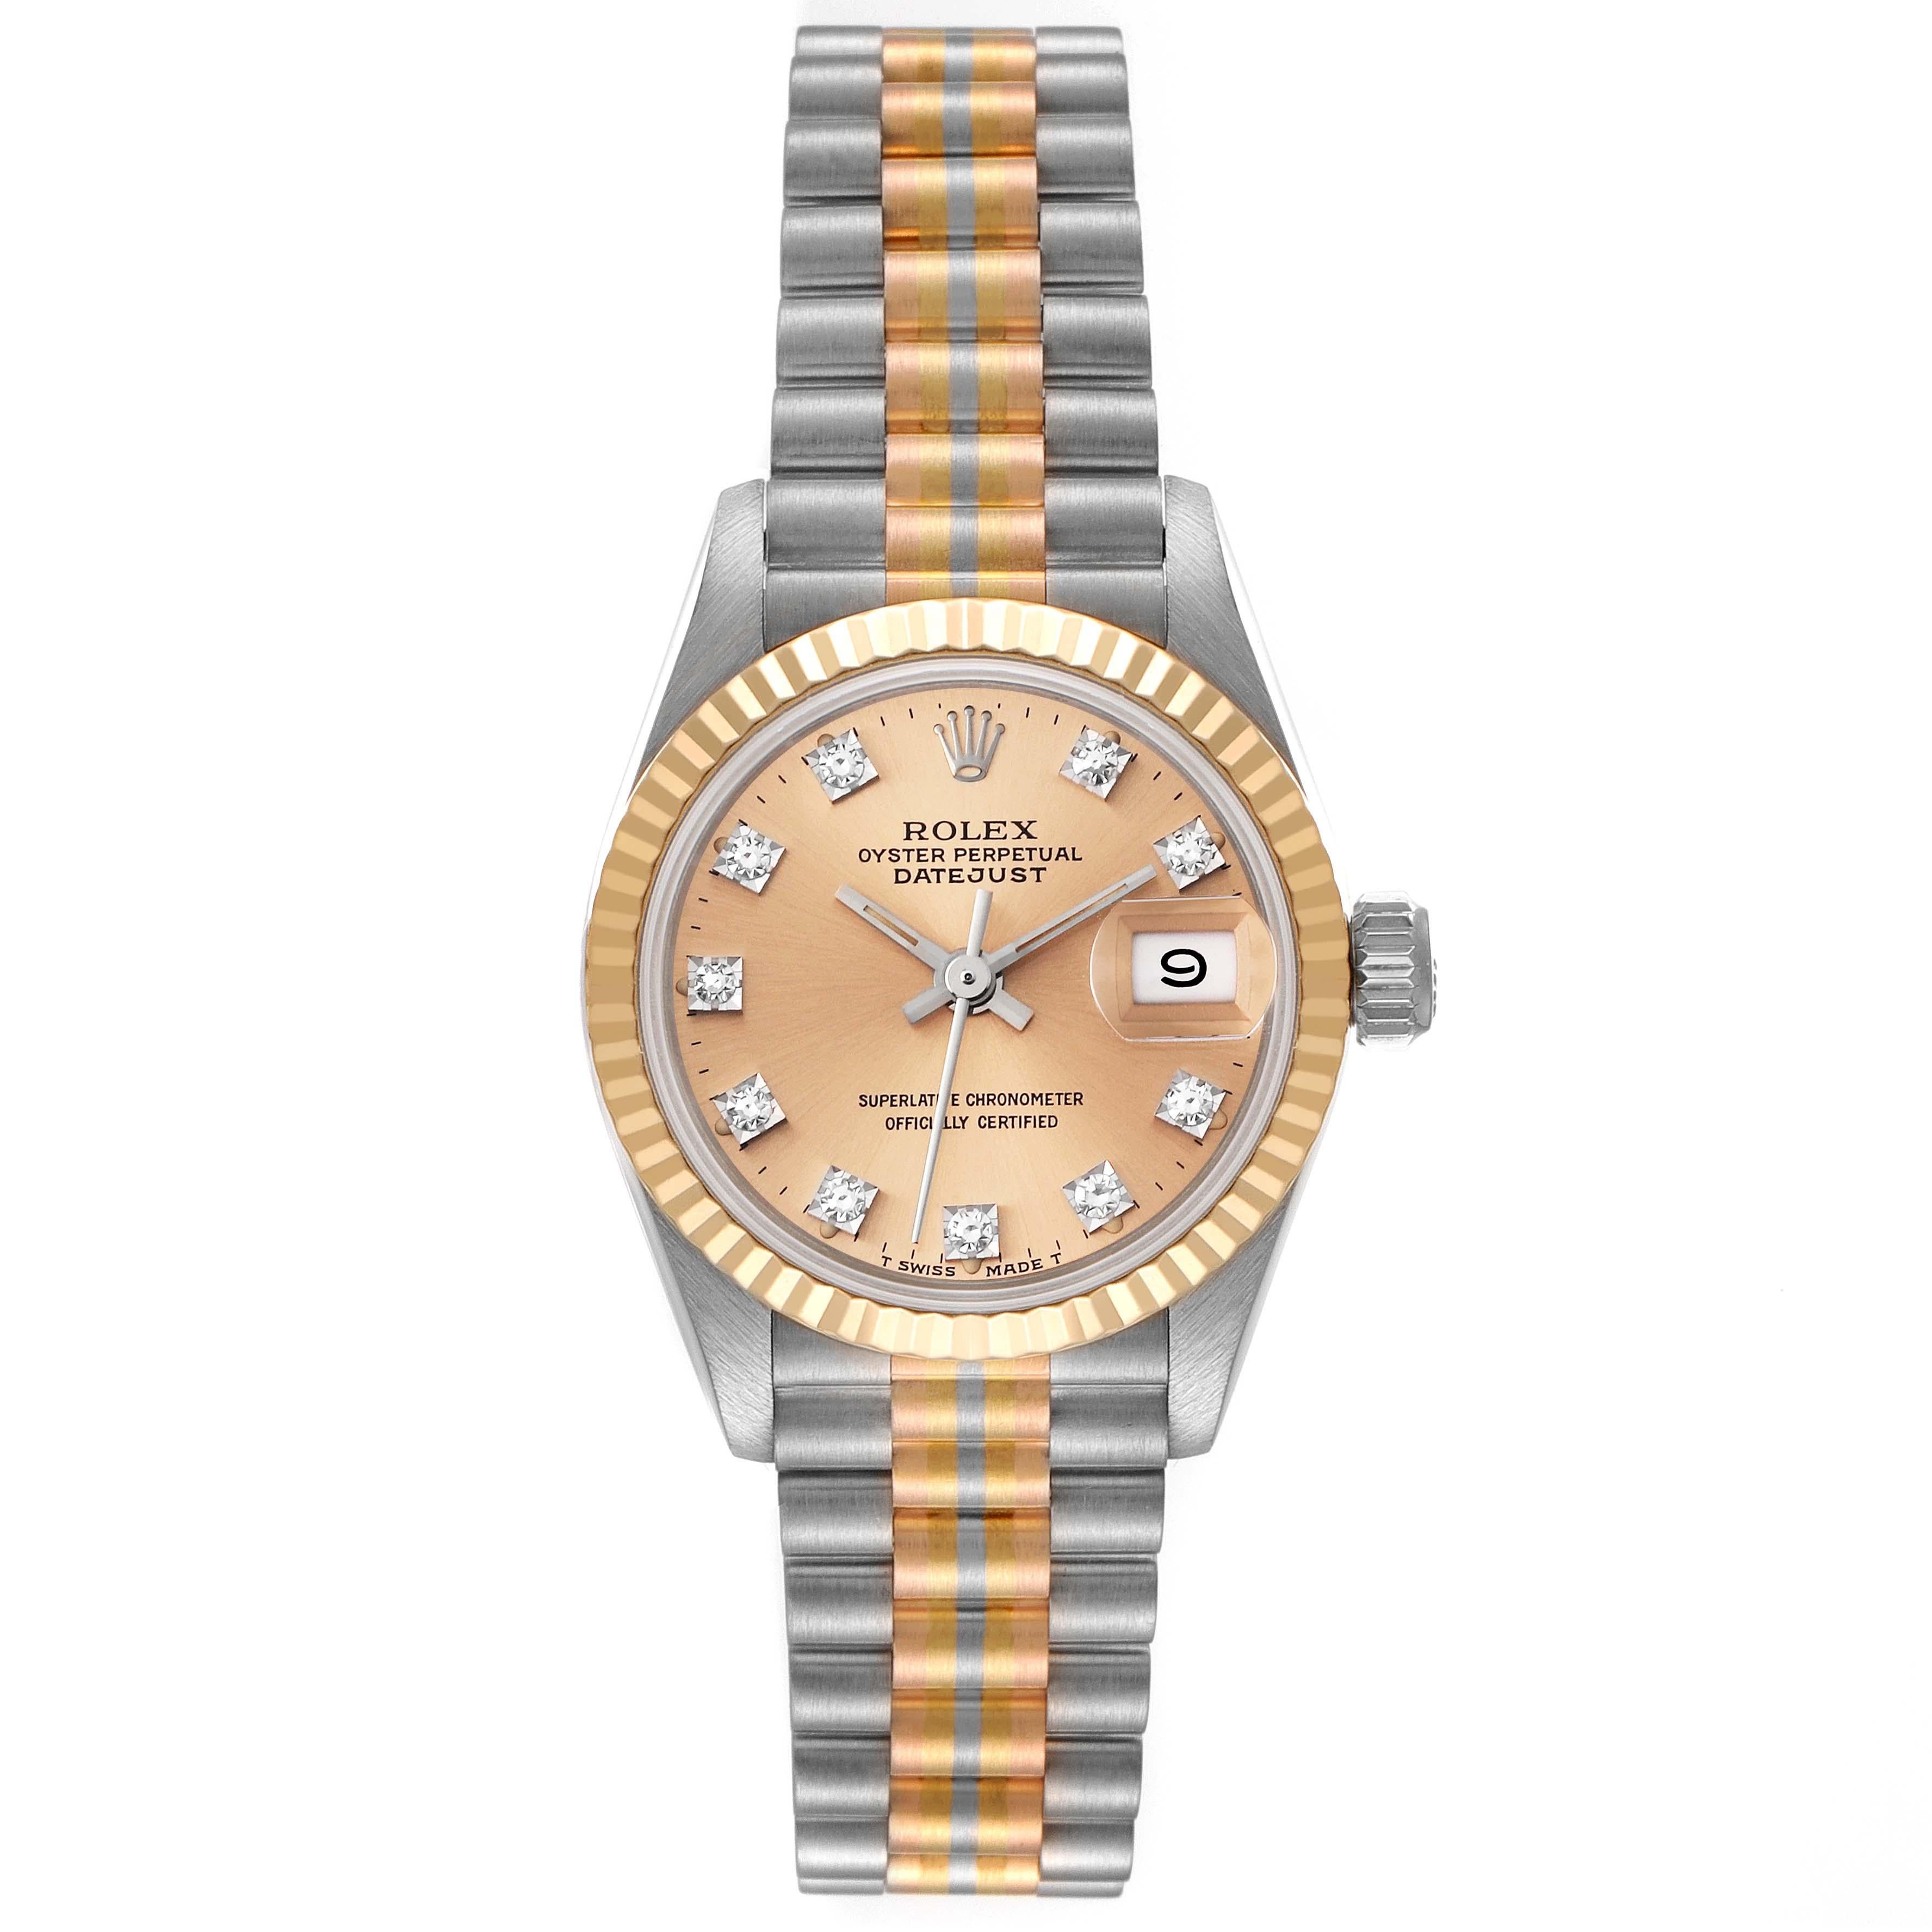 Rolex President Tridor White Yellow Rose Gold Diamond Ladies Watch 69179 Box Papers. Officially certified chronometer automatic self-winding movement. 18k white gold oyster case 26.0 mm in diameter. Rolex logo on crown. 18k yellow gold fluted bezel.